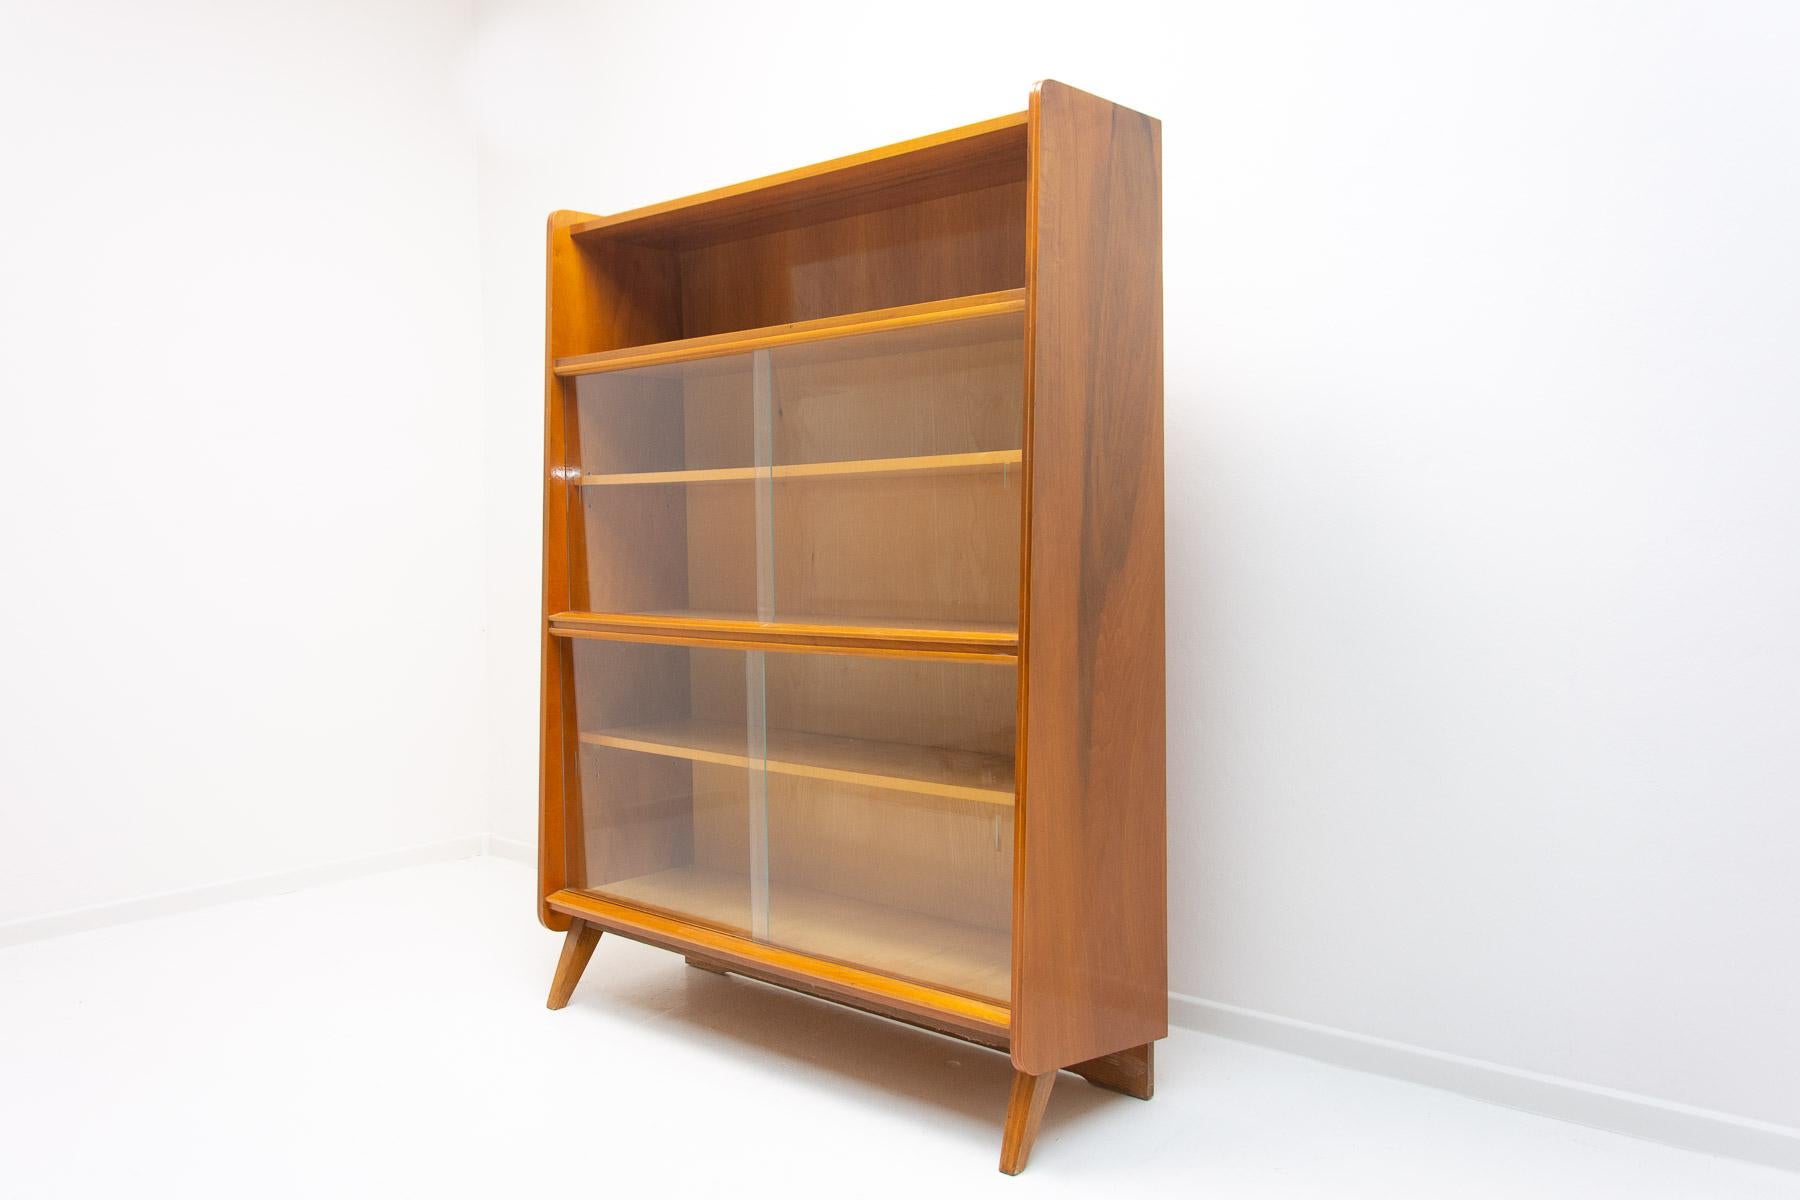 Mid century Vintage bookcase from the 1960´s. It was designed by František Jirák and was manufactured by Jitona company in the former Czechoslovakia. Features a simple design, a glazed section with five storage spaces. In Very good condition.